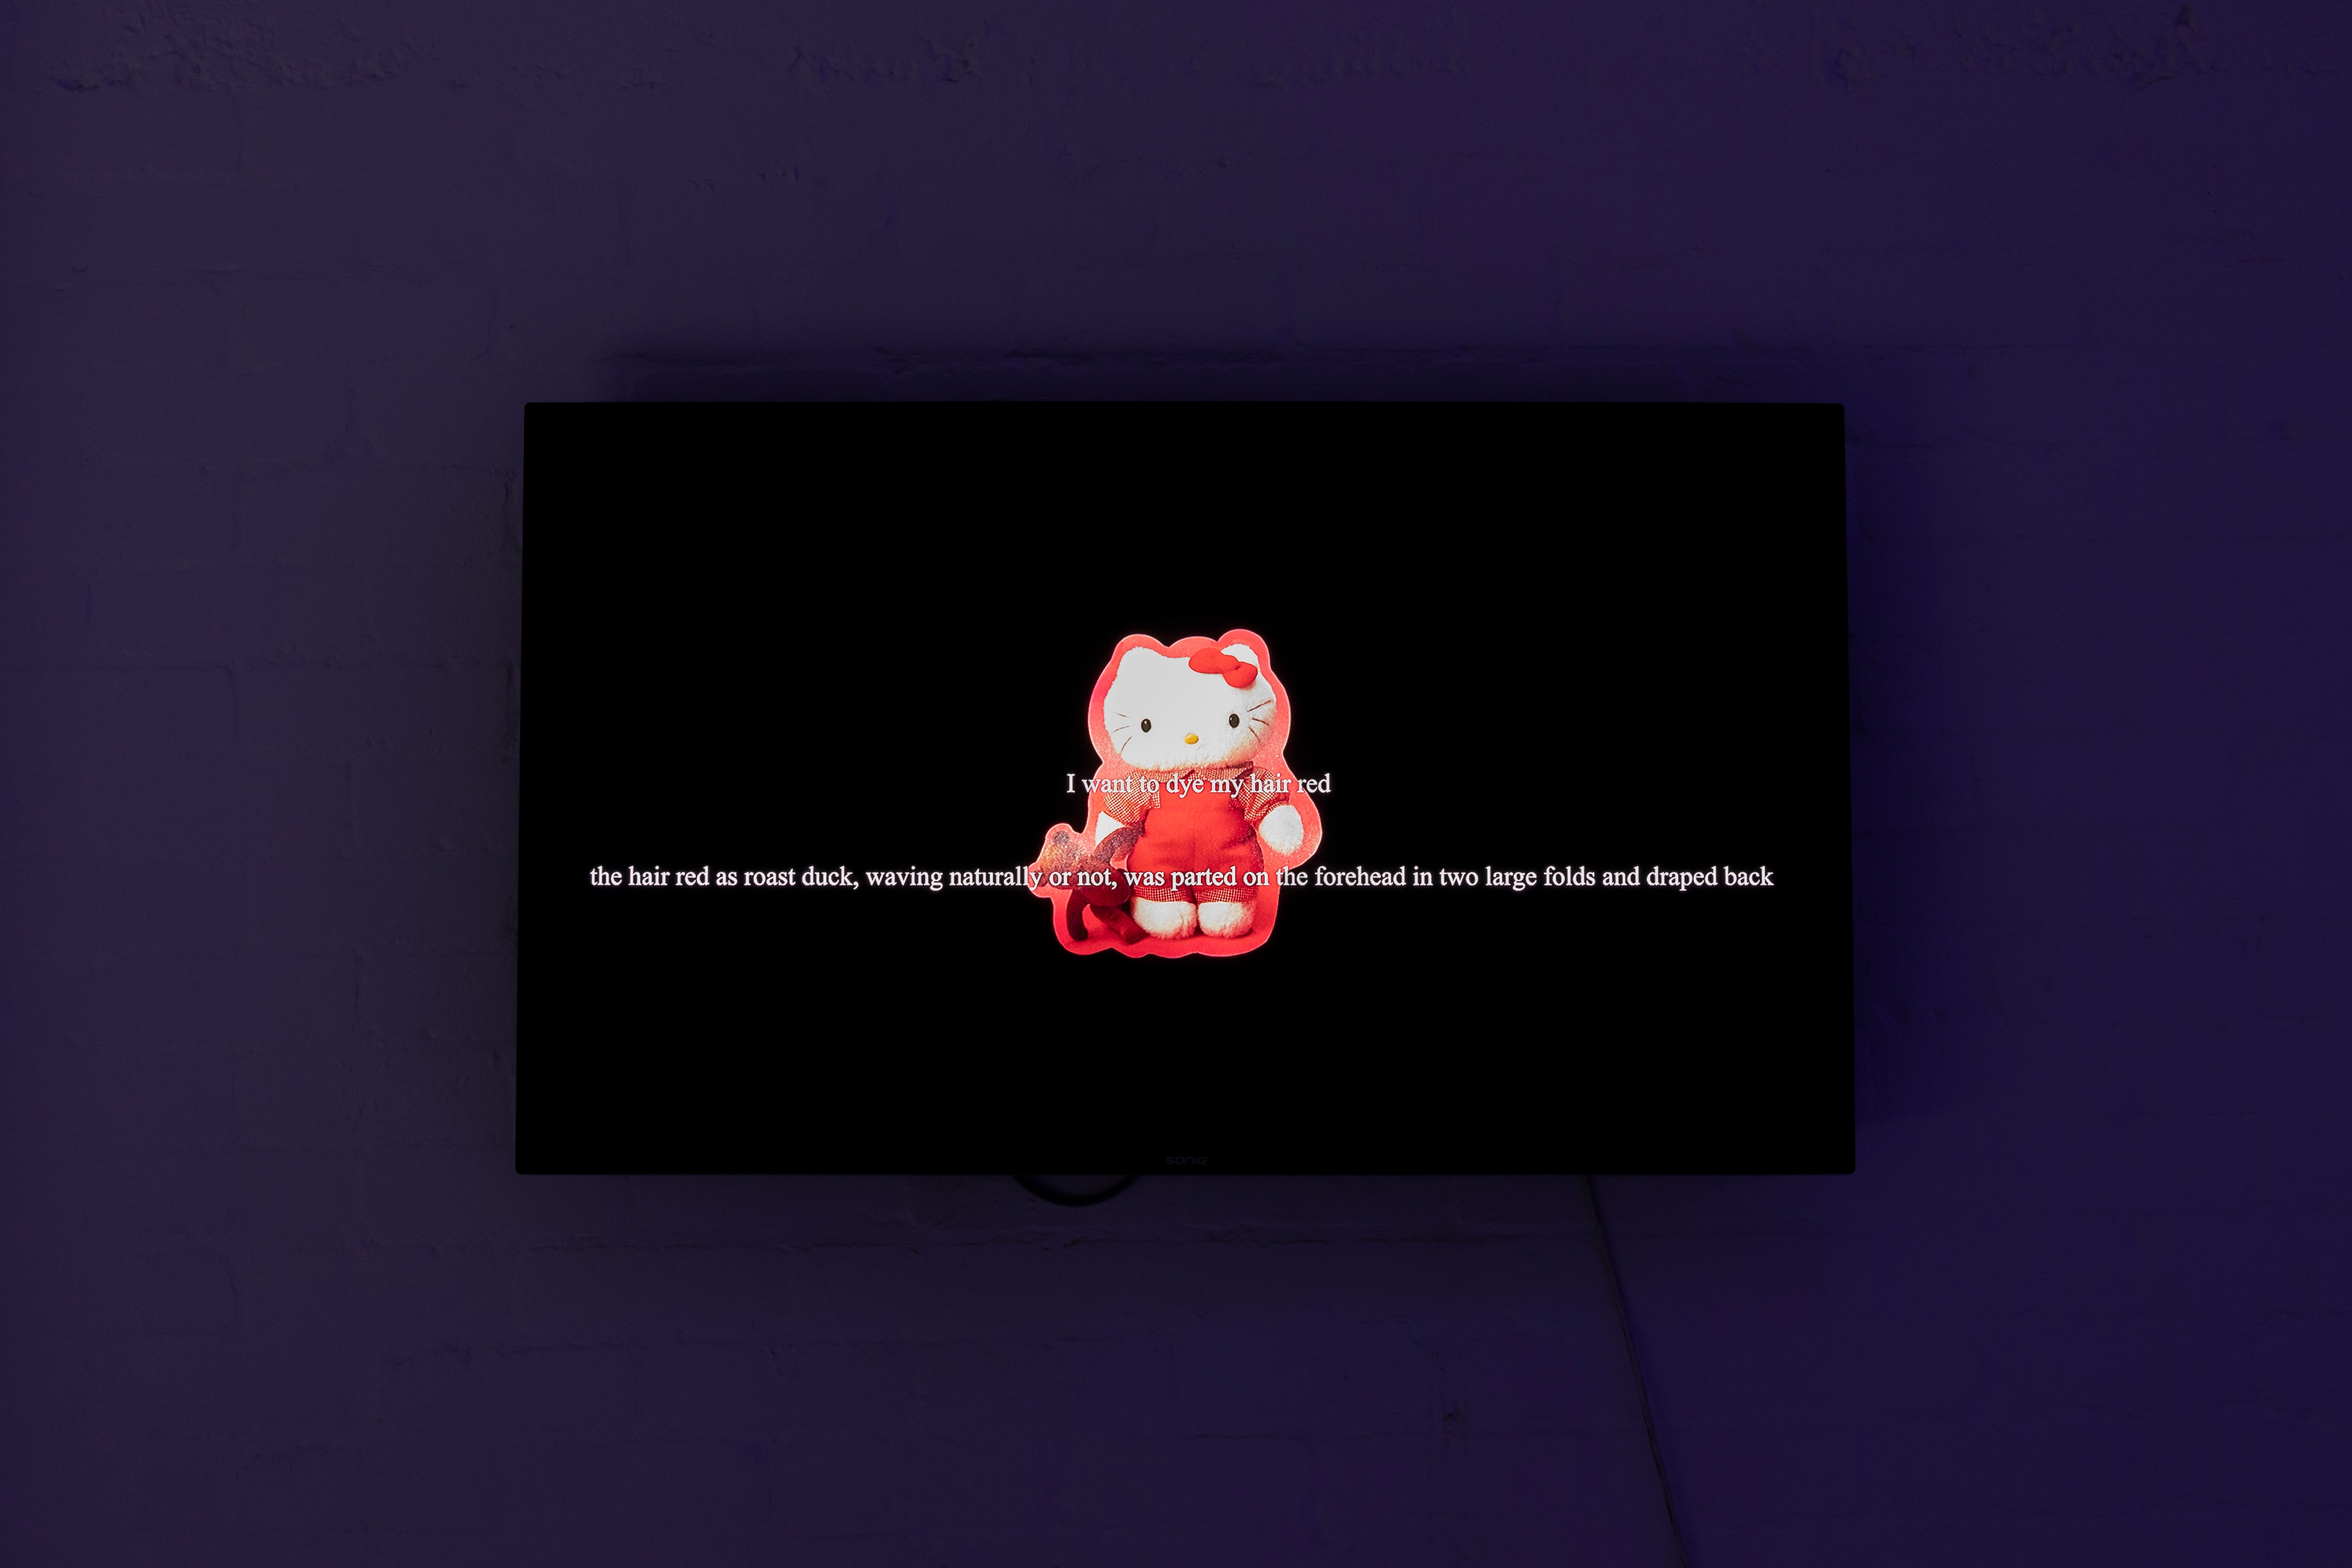 a video on the wall featuring text overlay on a Hello Kitty icon